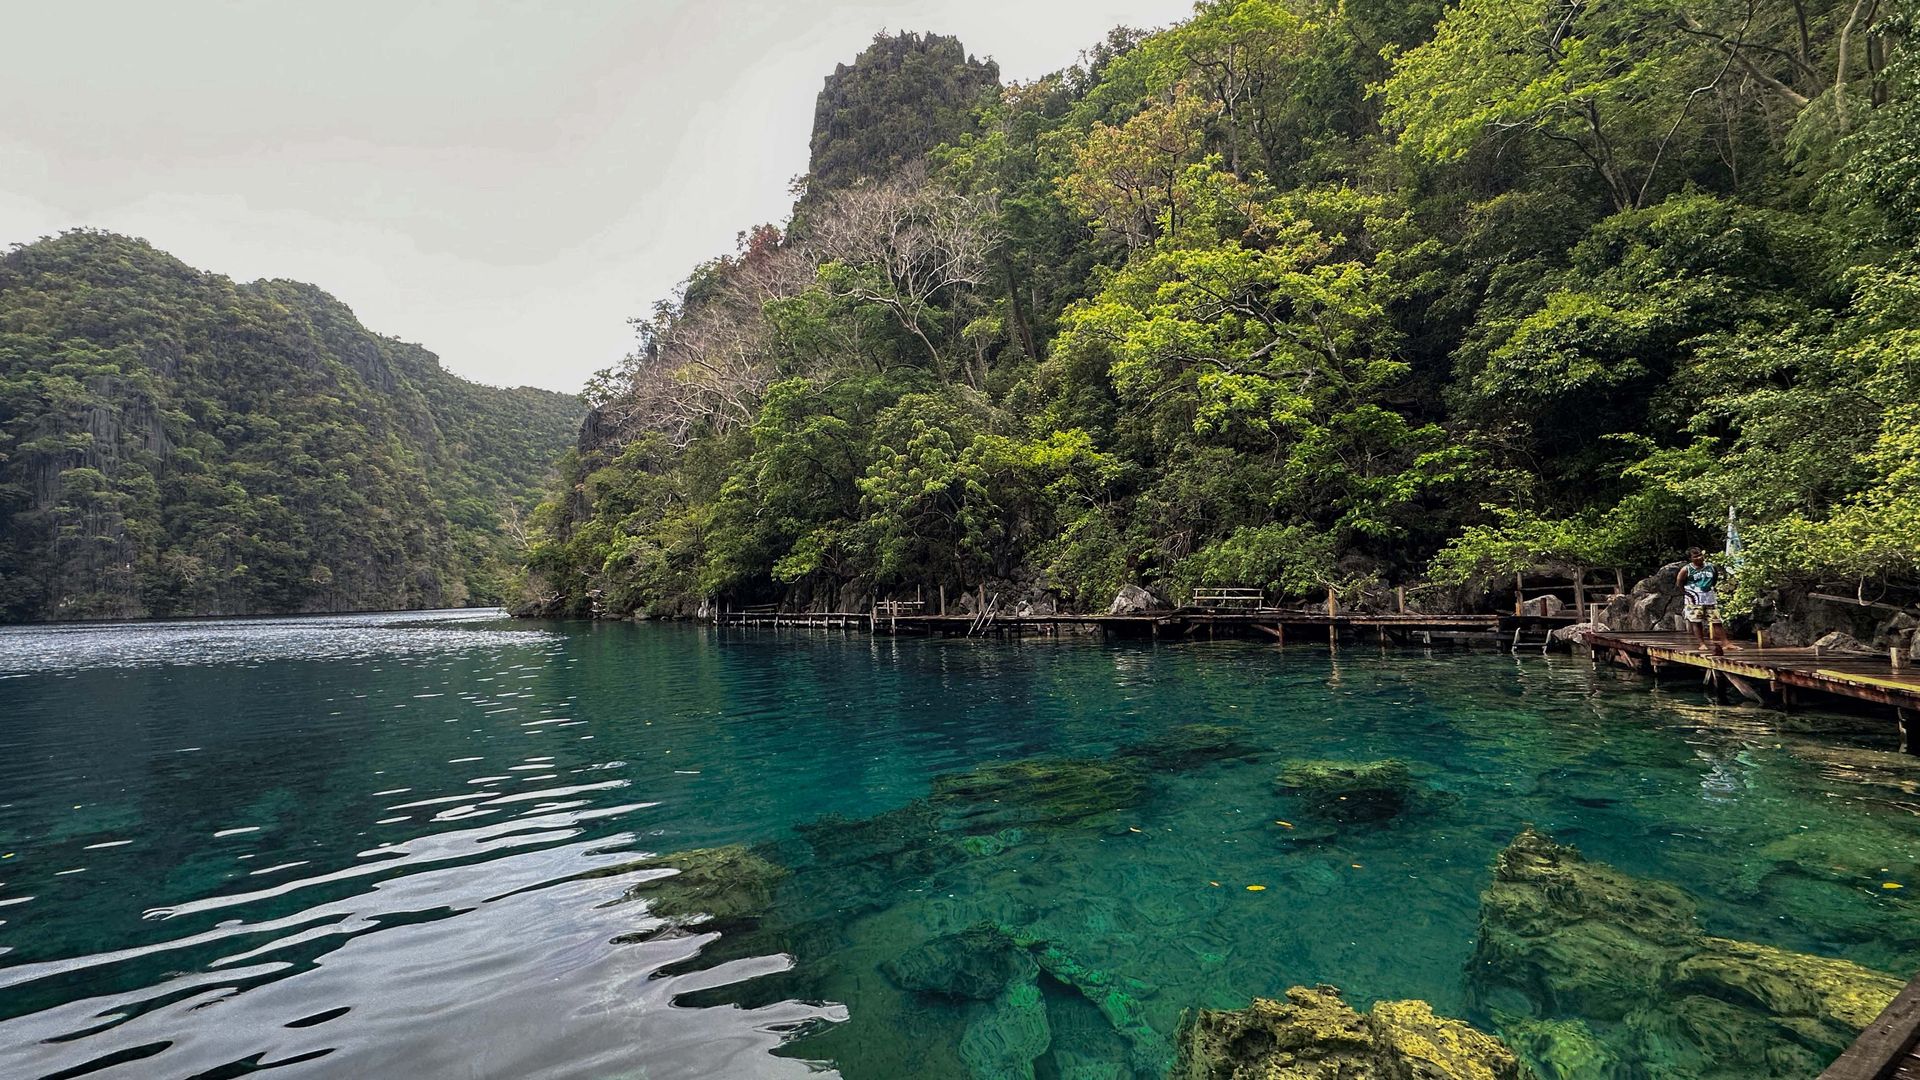 Underwater rock formations can be seen from the surface of Kayangan Lake. PHOTO: VINA SALAZAR